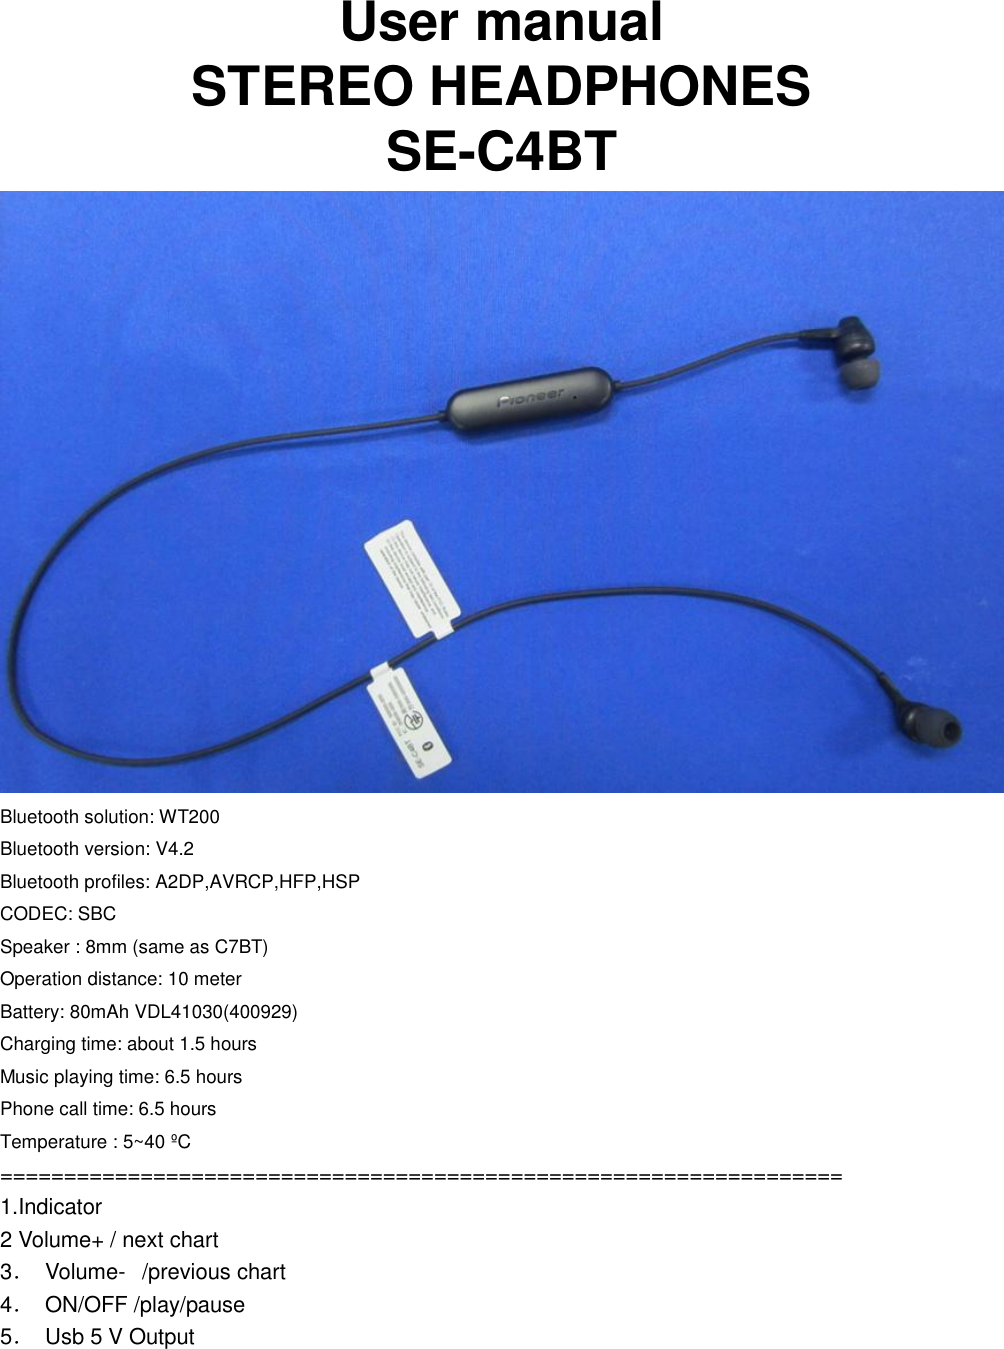  User manual STEREO HEADPHONES             SE-C4BT    Bluetooth solution: WT200 Bluetooth version: V4.2 Bluetooth profiles: A2DP,AVRCP,HFP,HSP CODEC: SBC Speaker : 8mm (same as C7BT) Operation distance: 10 meter Battery: 80mAh VDL41030(400929) Charging time: about 1.5 hours Music playing time: 6.5 hours Phone call time: 6.5 hours Temperature : 5~40 ºC ================================================================== 1.Indicator                   2 Volume+ / next chart            3．  Volume-   /previous chart                   4．  ON/OFF /play/pause                 5．  Usb 5 V Output       